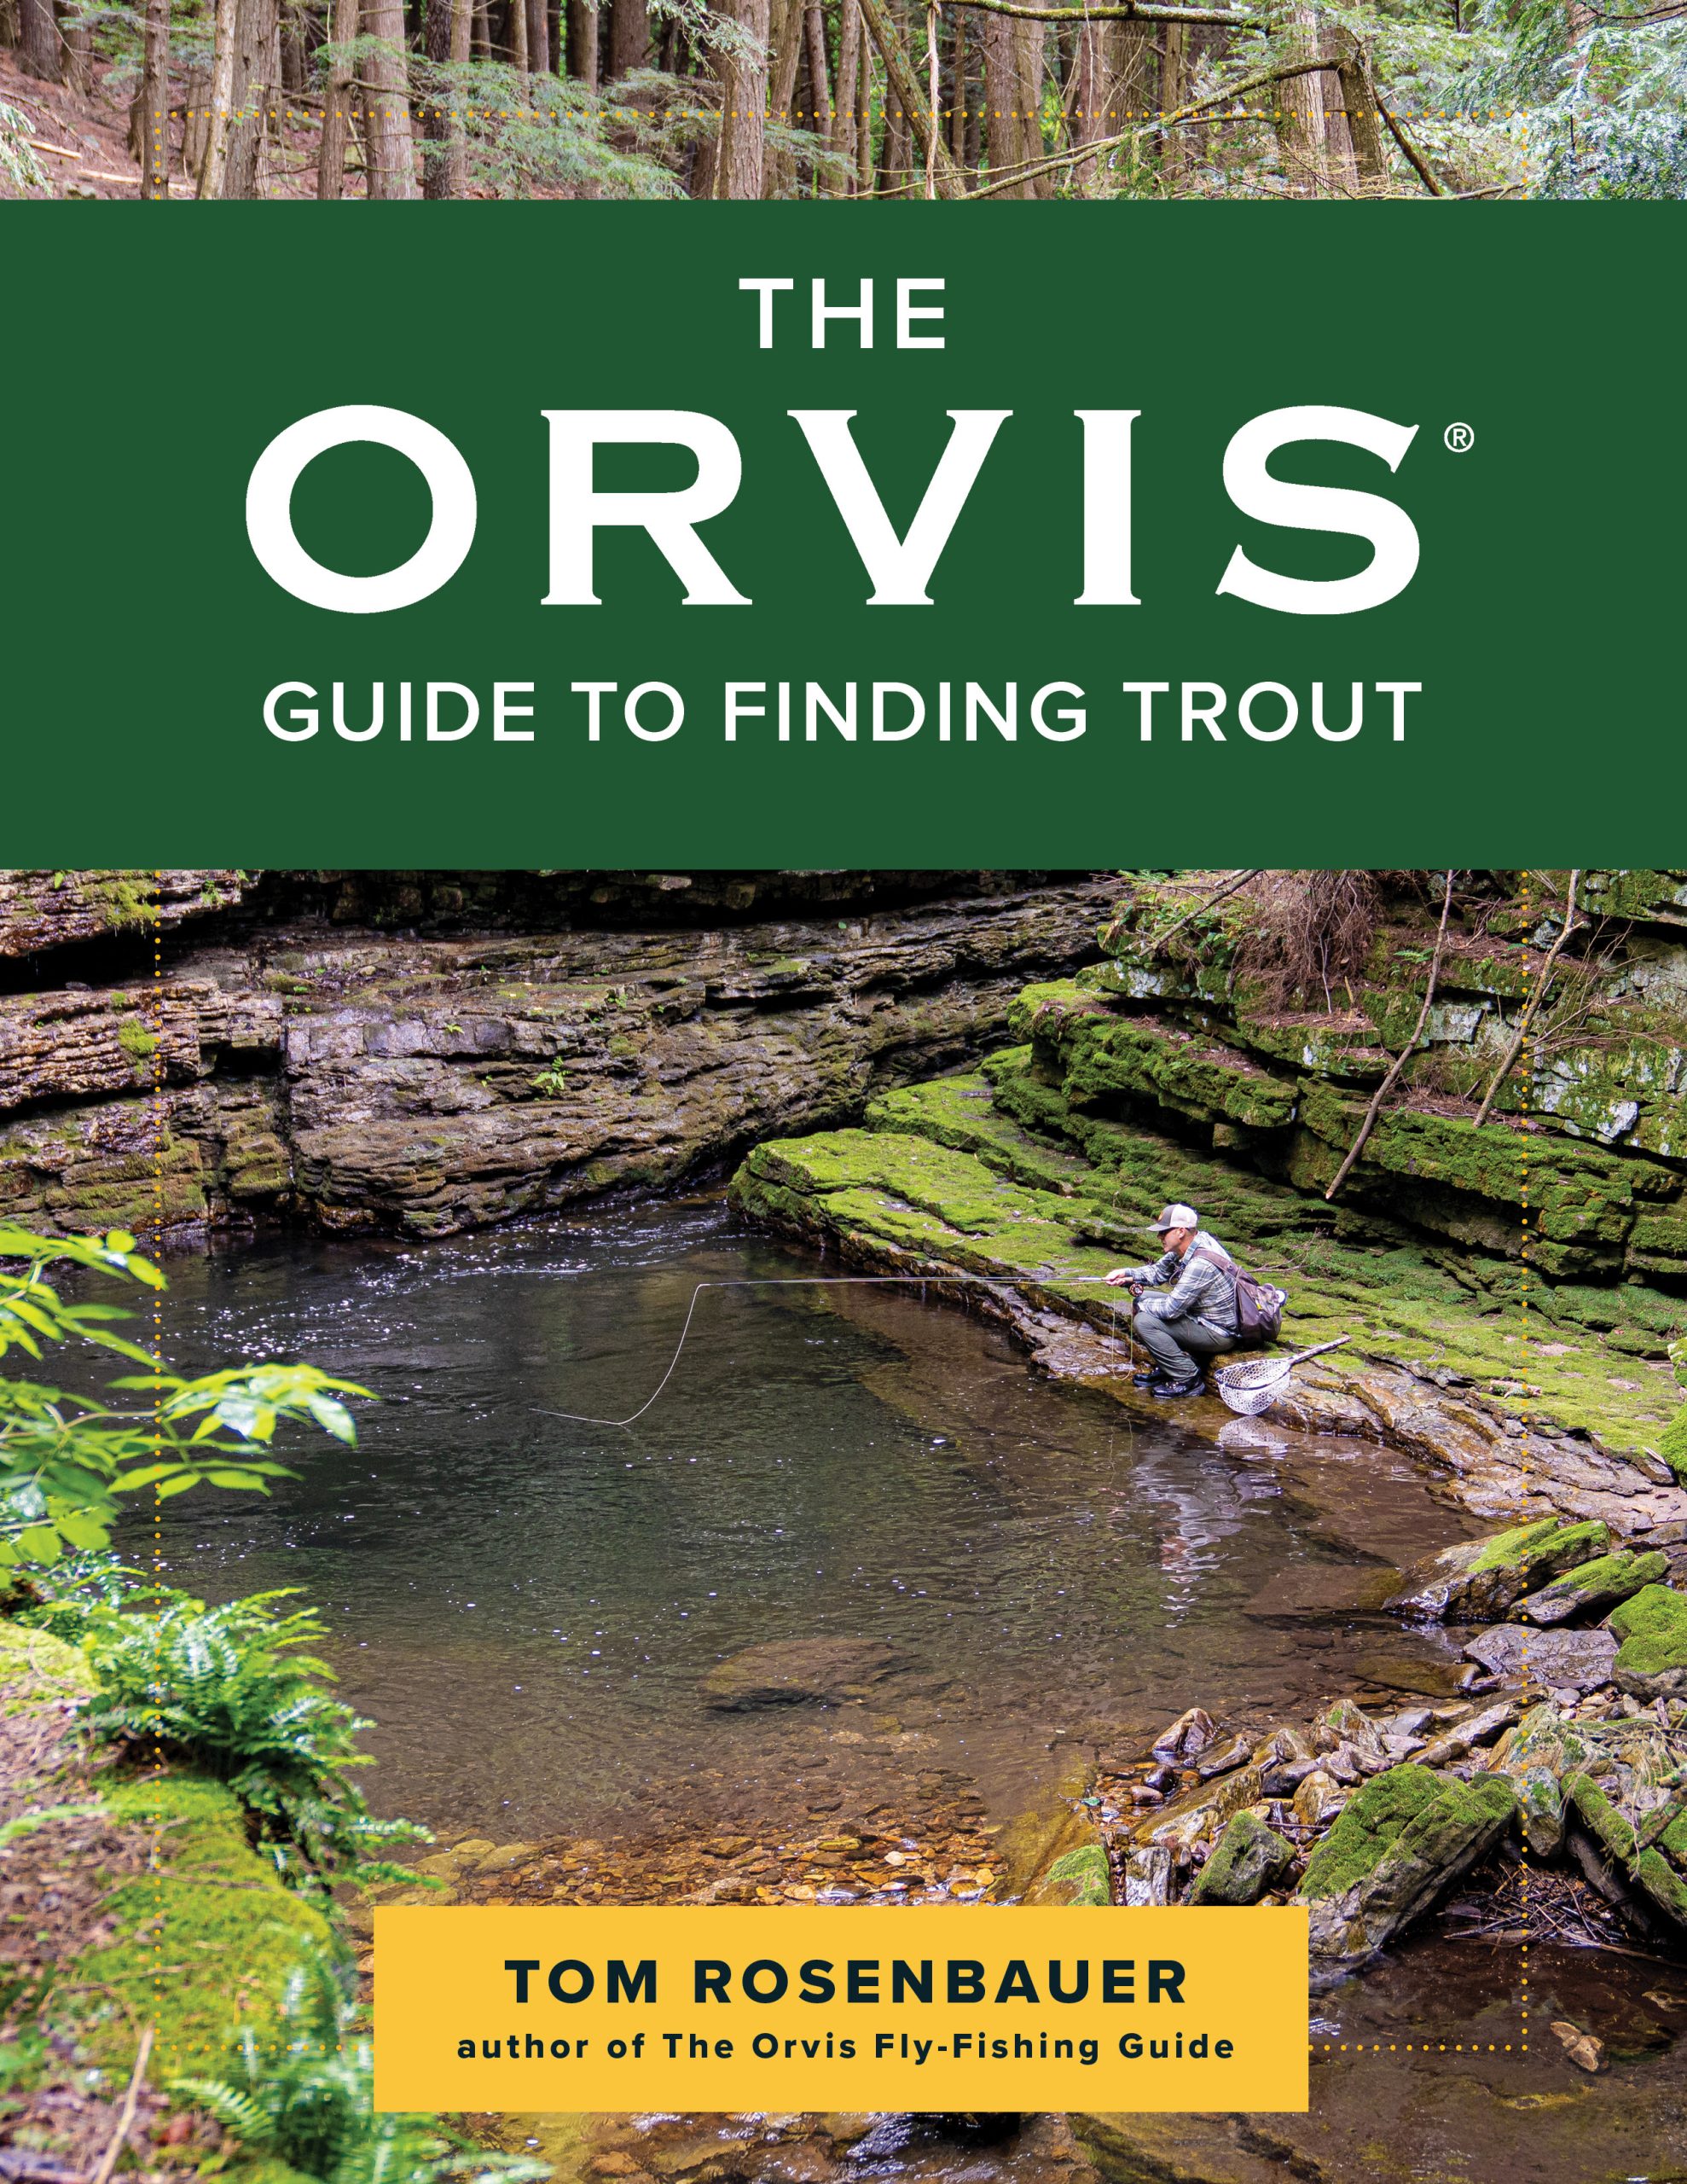 The Orvis Guide to Small Stream Fly Fishing - Book Review